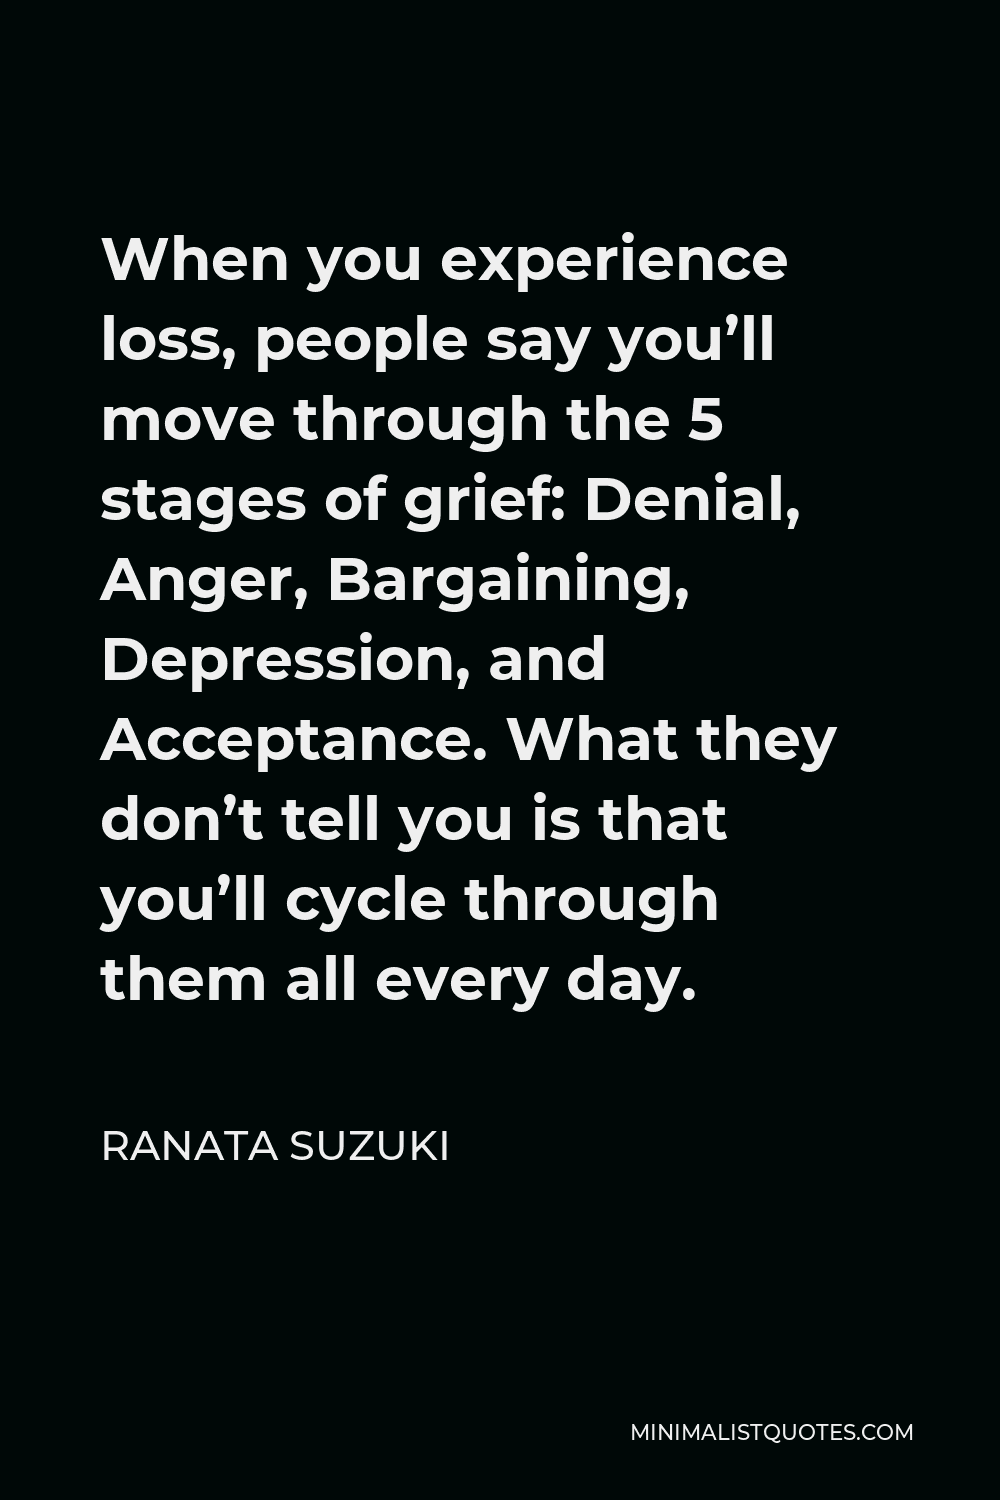 Ranata Suzuki Quote - When you experience loss, people say you’ll move through the 5 stages of grief: Denial, Anger, Bargaining, Depression, and Acceptance. What they don’t tell you is that you’ll cycle through them all every day.